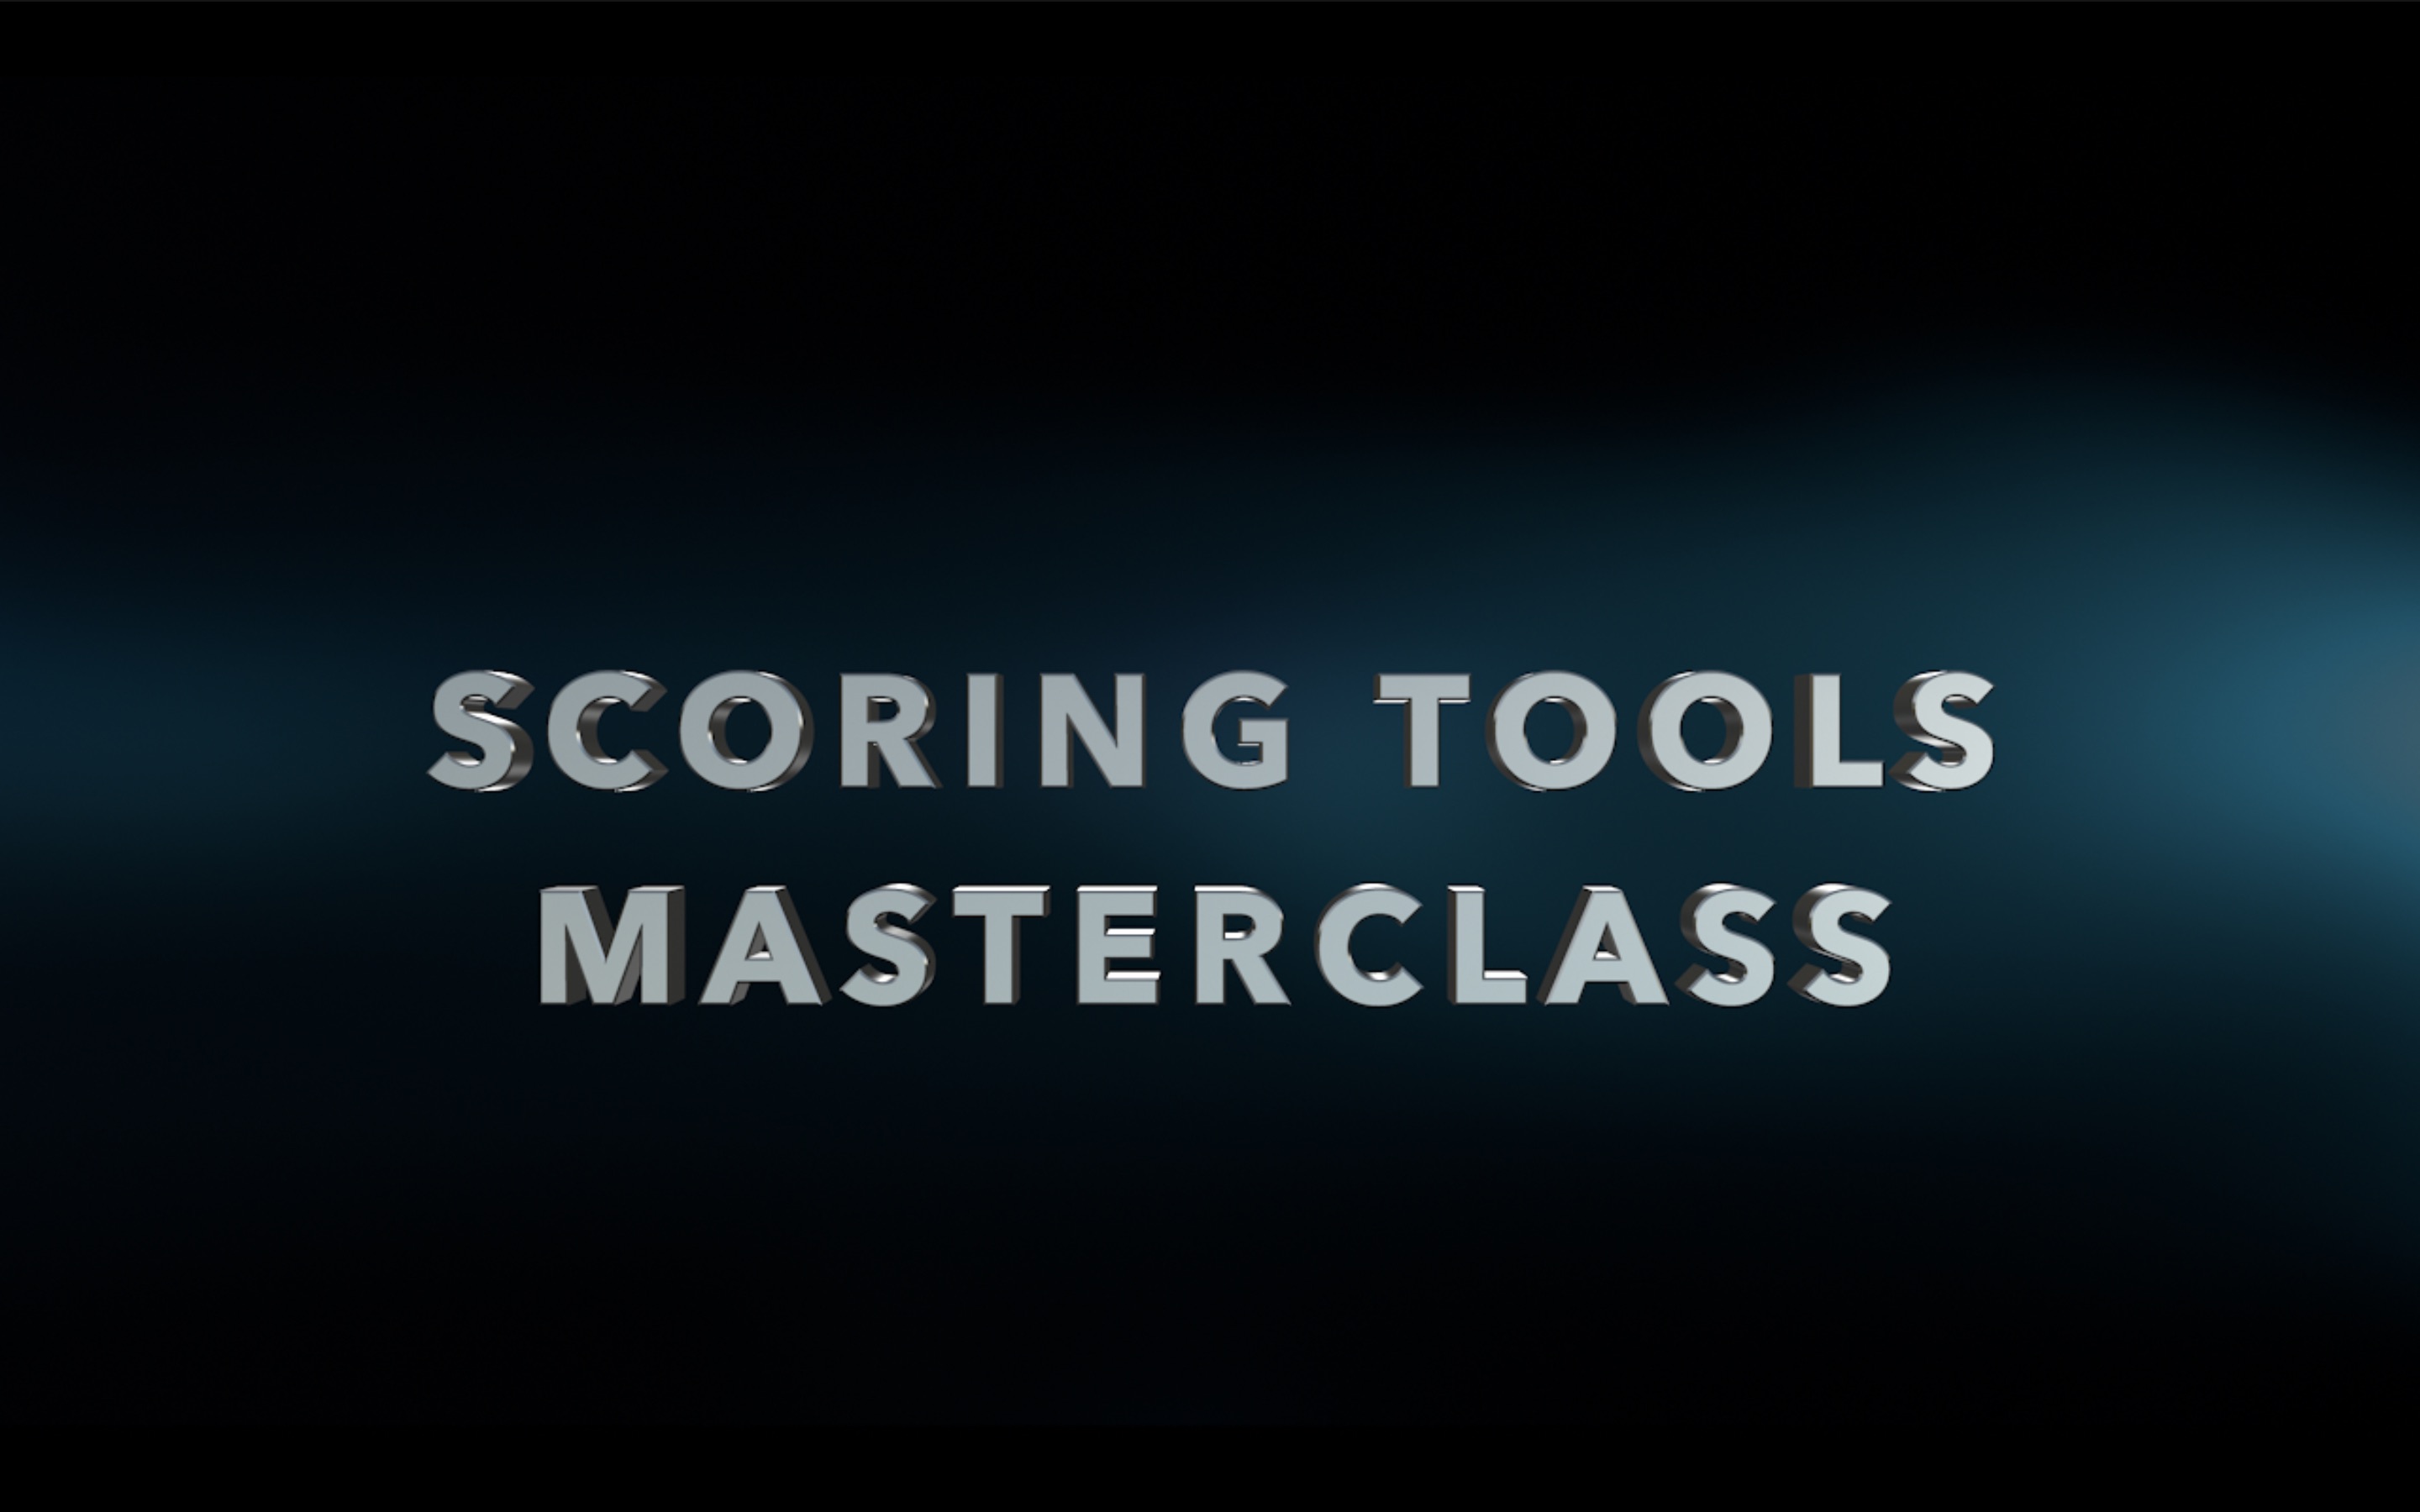 Scoring Tools Masterclass – Limited Special Discount for StrongMocha Reader